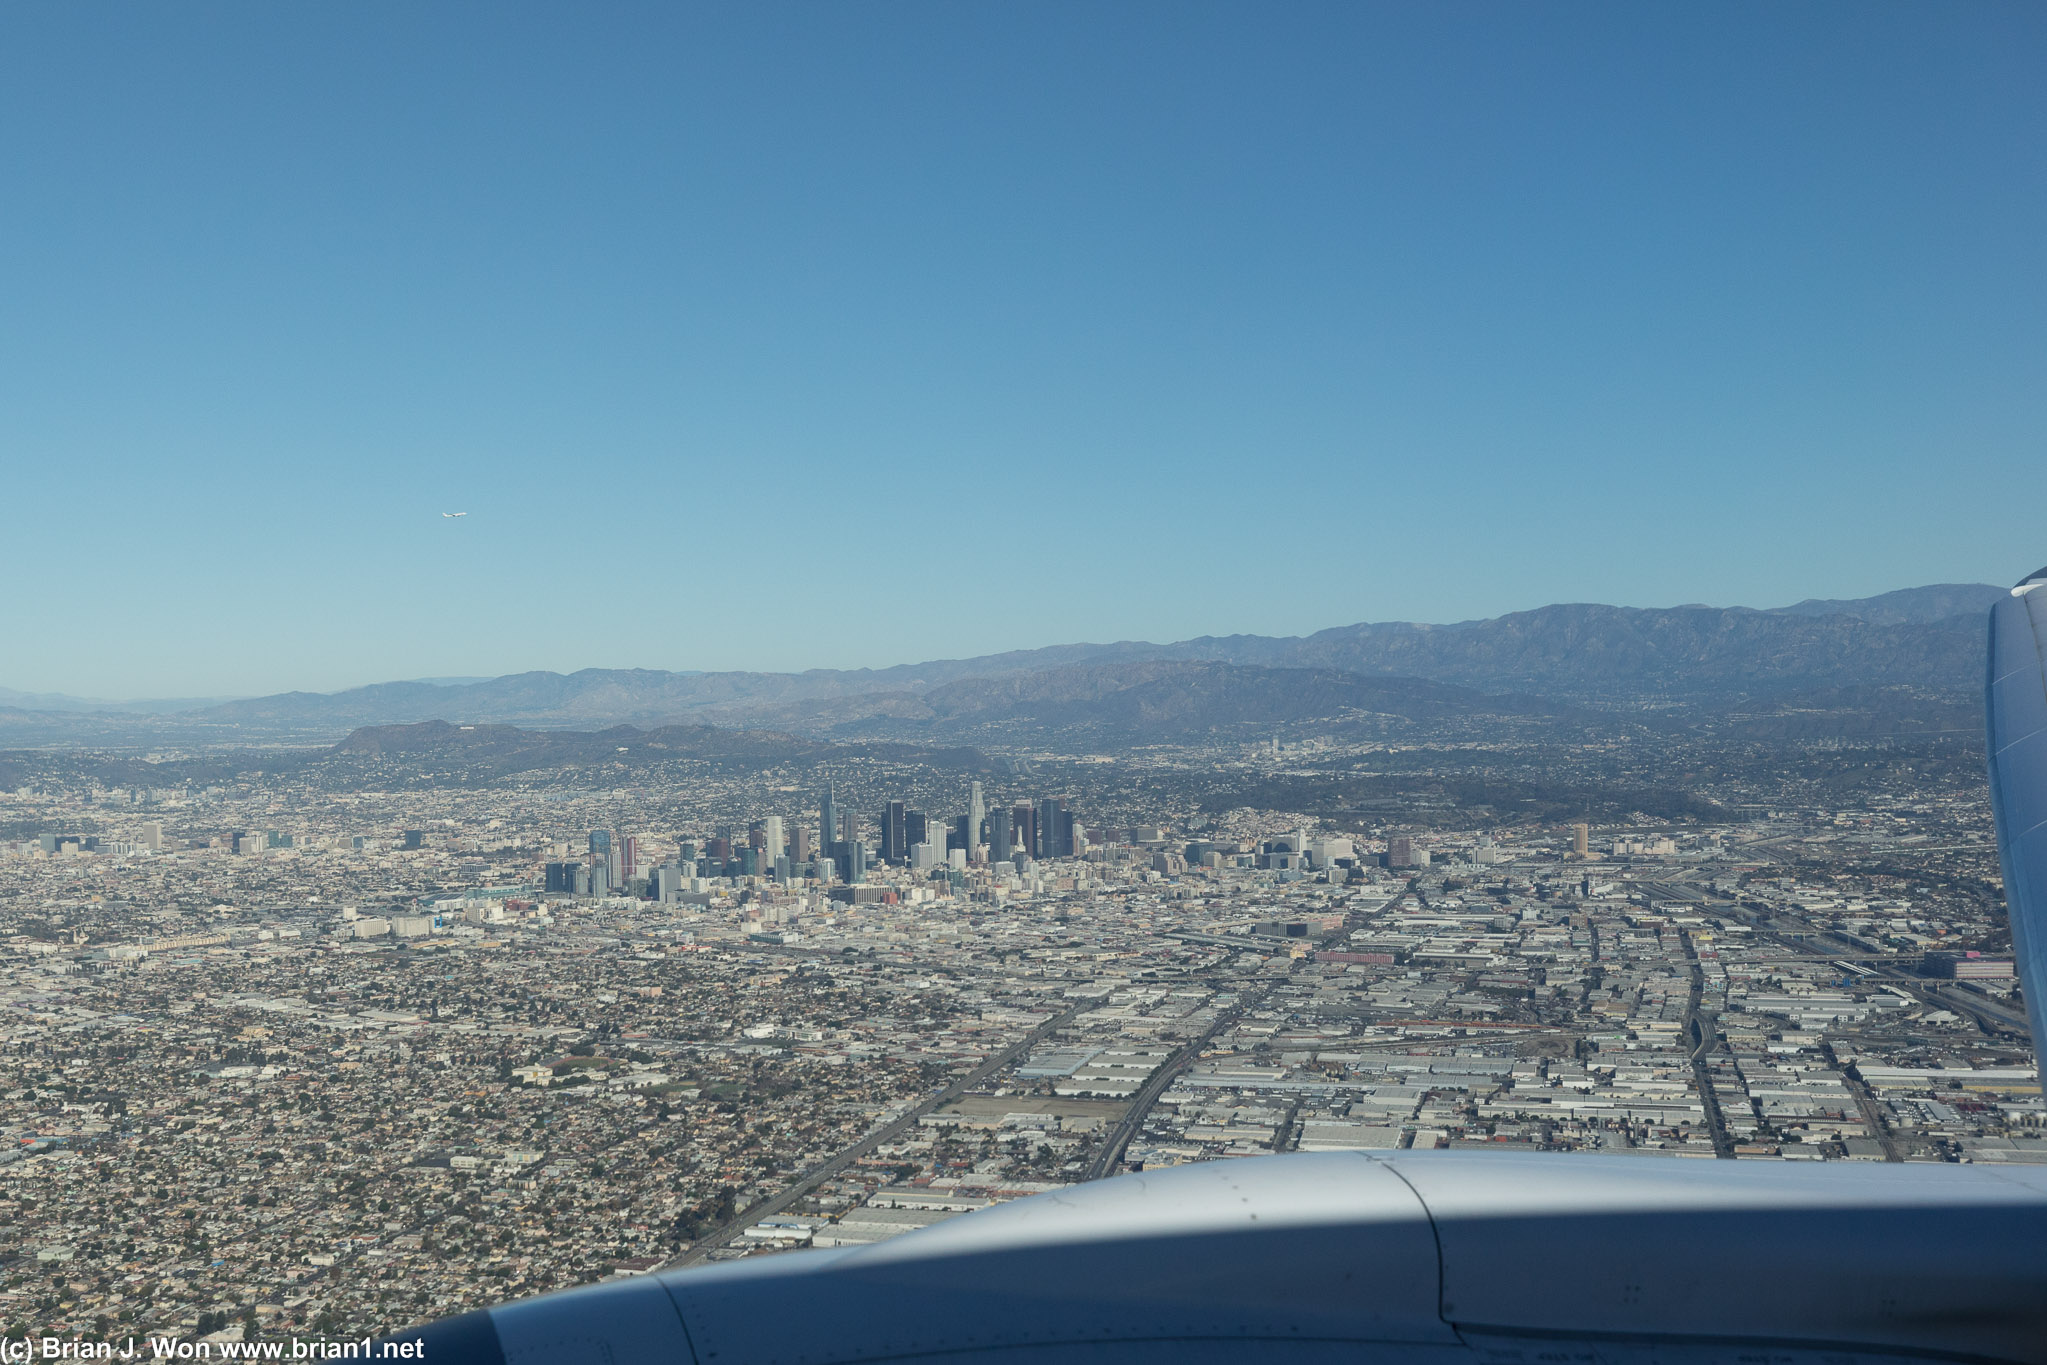 Downtown Los Angeles in the distance.